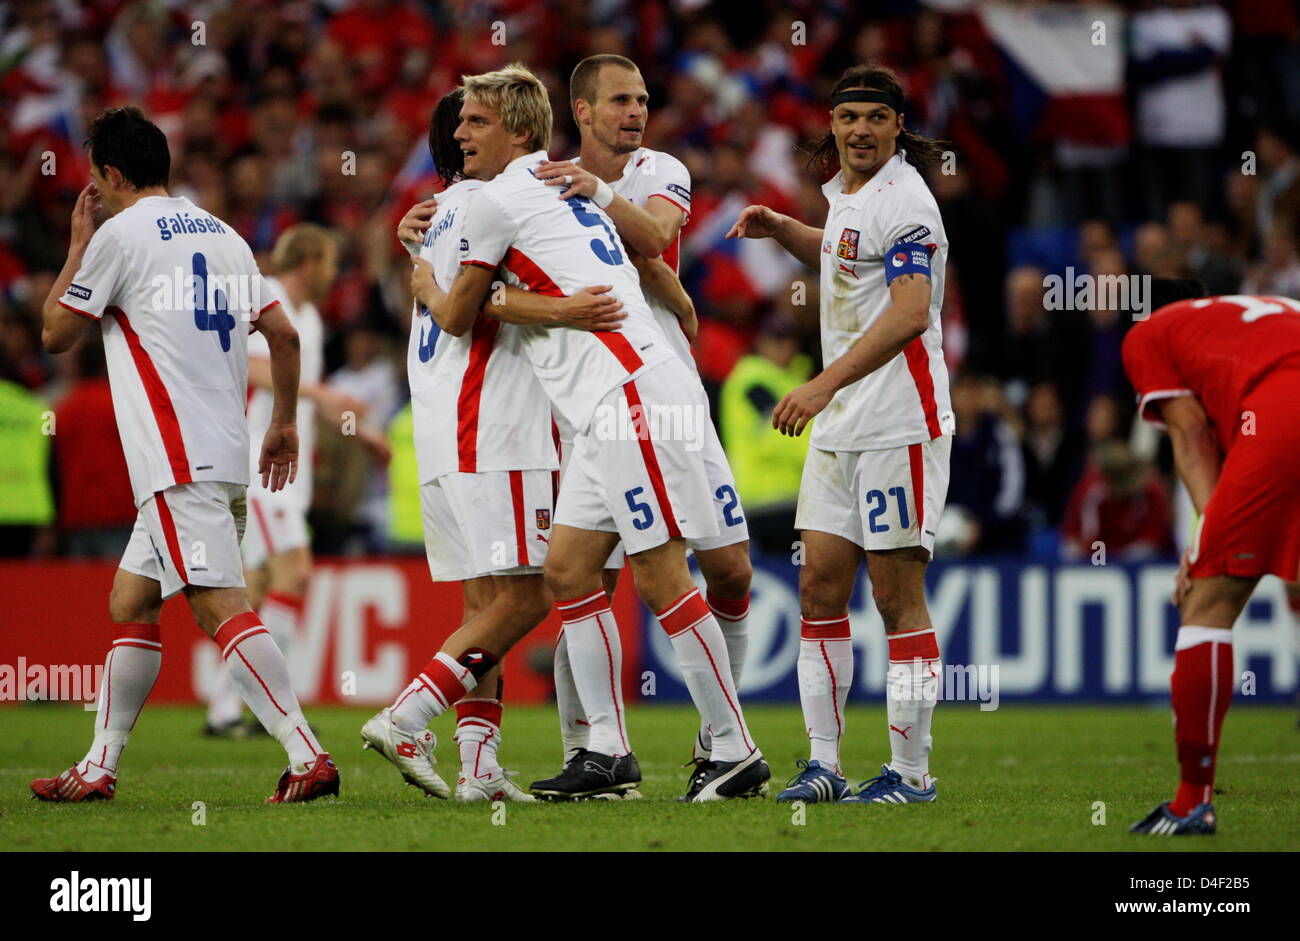 Tomas Ujfalusi of Czech Republic jubilates with his teammates after the EURO 2008 preliminary round group A match in St. Jakobs Arena, Basel, Switzerland, 07 June 2008. Switzerland lost 0-1. Photo: Oliver Berg dpa +please note UEFA restrictions particularly in regard to slide shows and 'No Mobile Services'+ +++(c) dpa - Bildfunk+++ Stock Photo